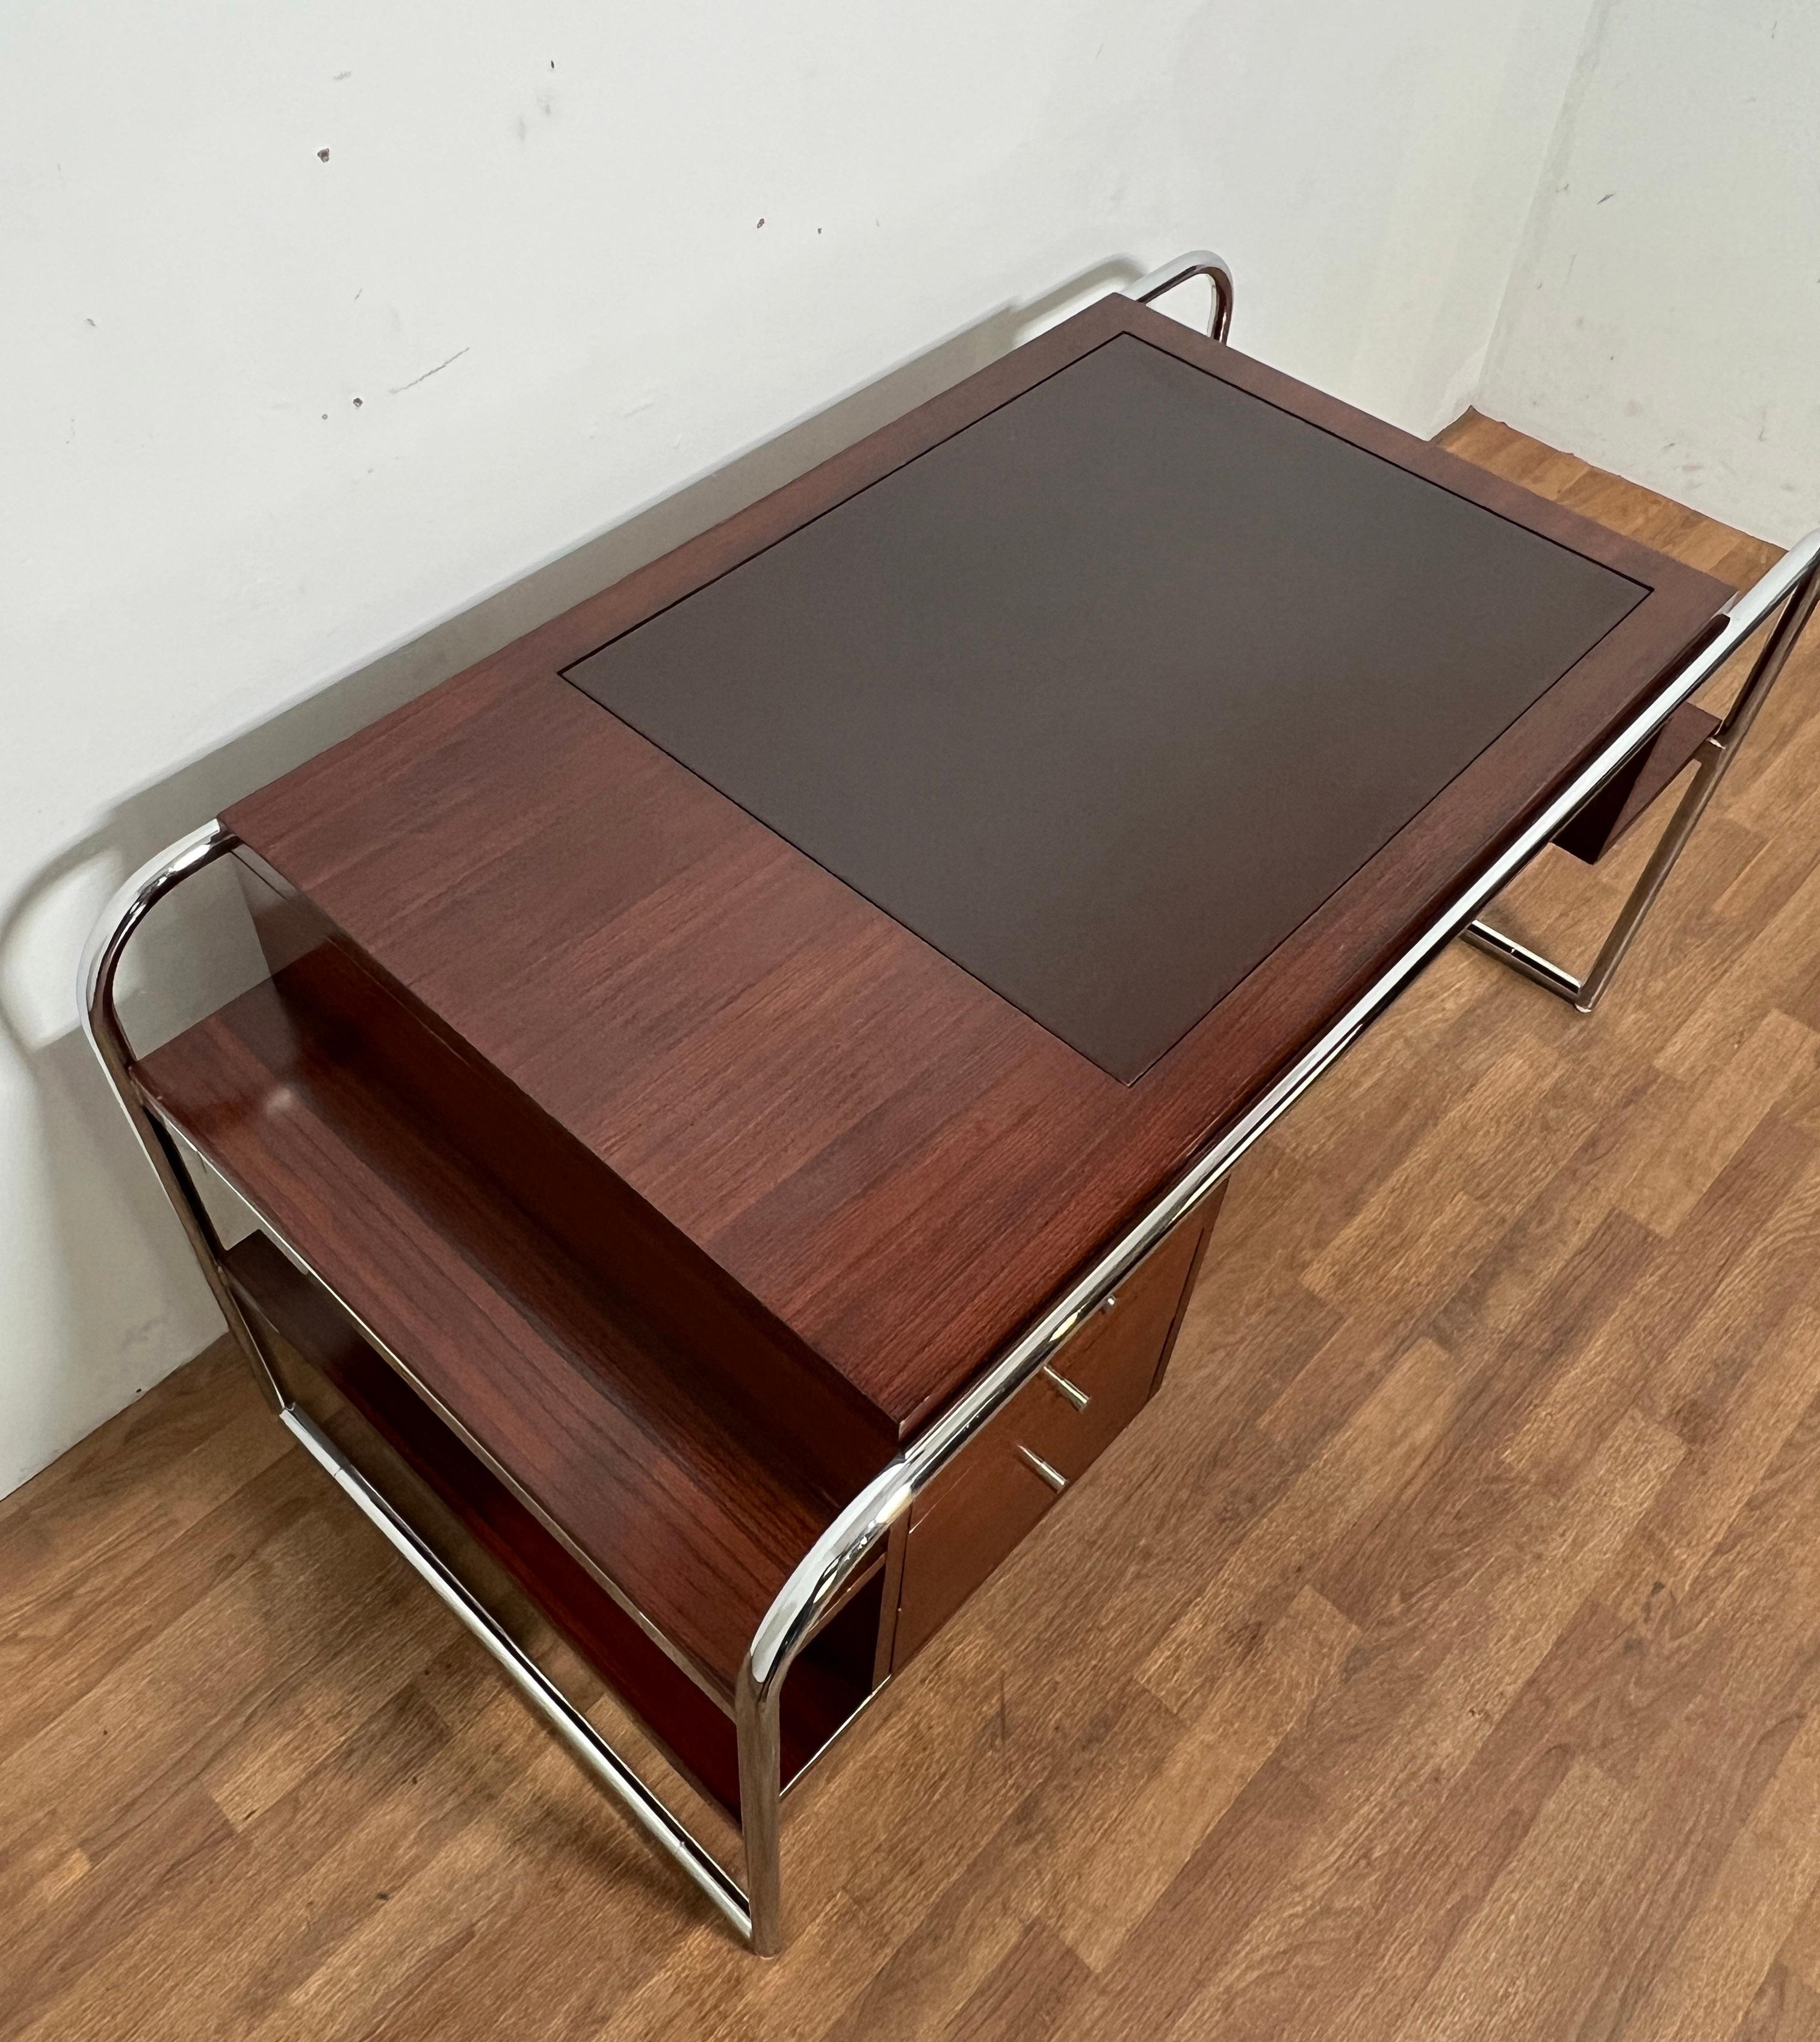 Contemporary Ralph Lauren Bauhaus Inspired Desk in Rosewood, Chrome and Leather For Sale